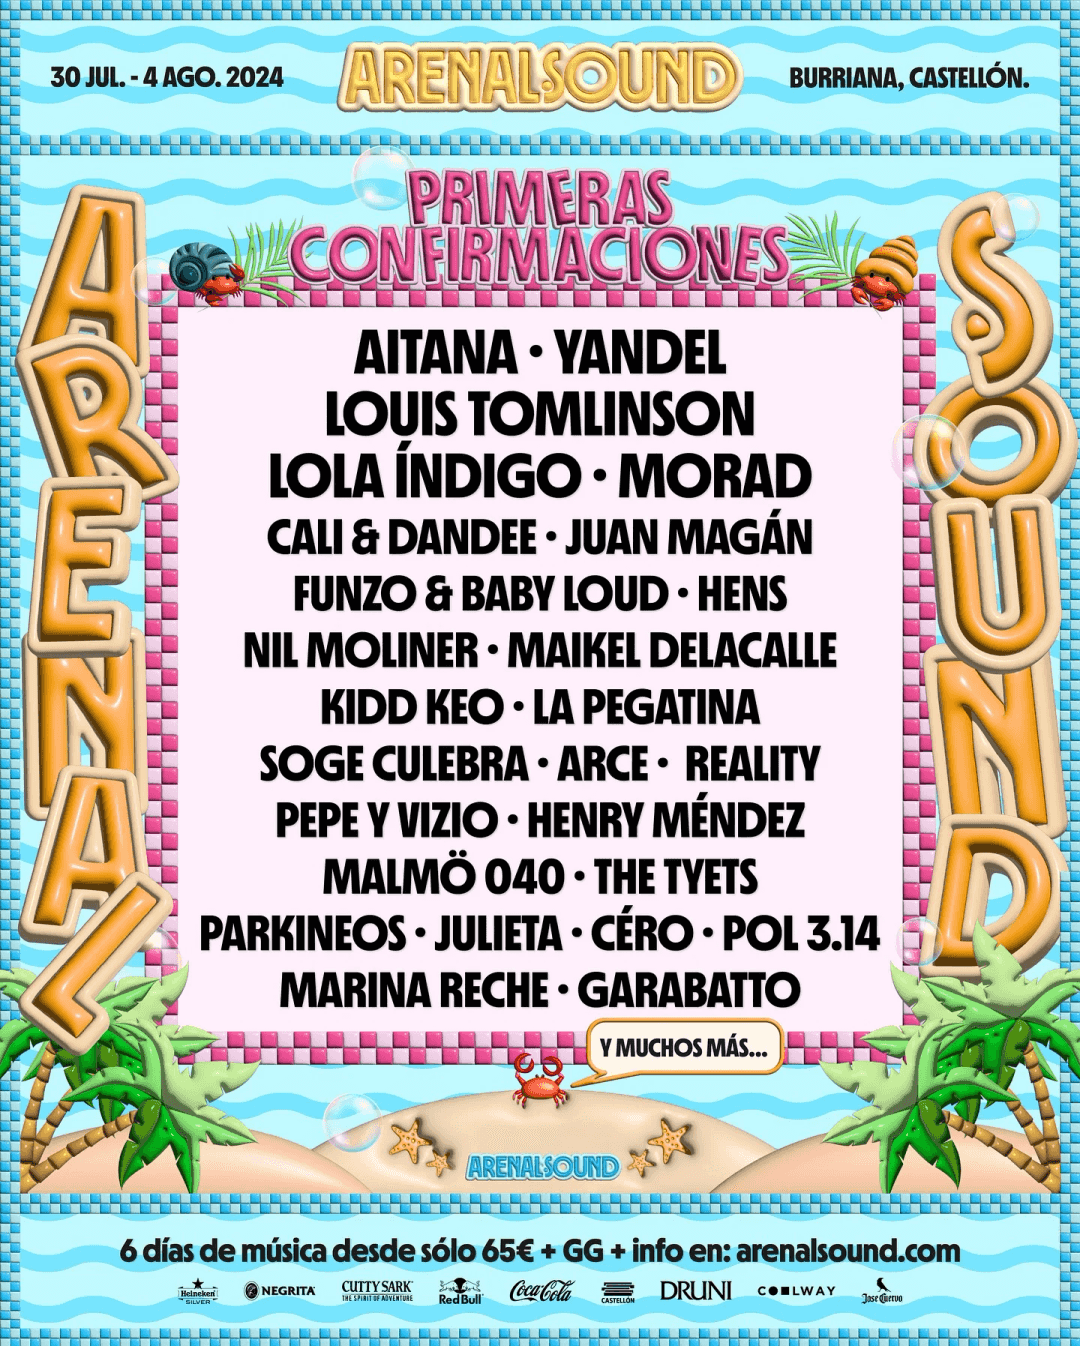 Arenal Sound 2024 in Bilbao